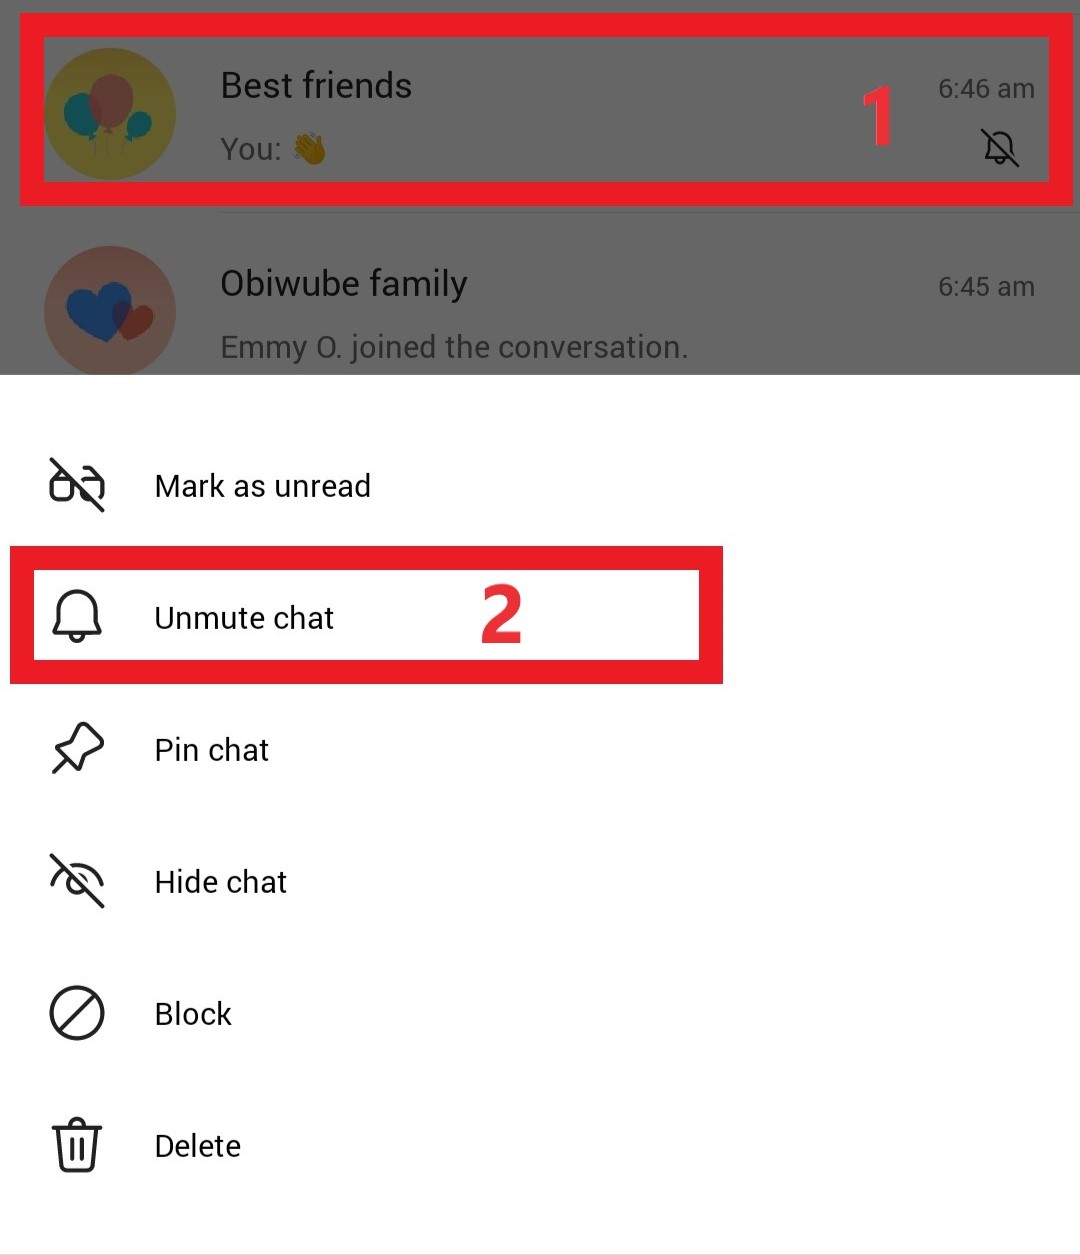 Unmute chats in Microsoft Teams